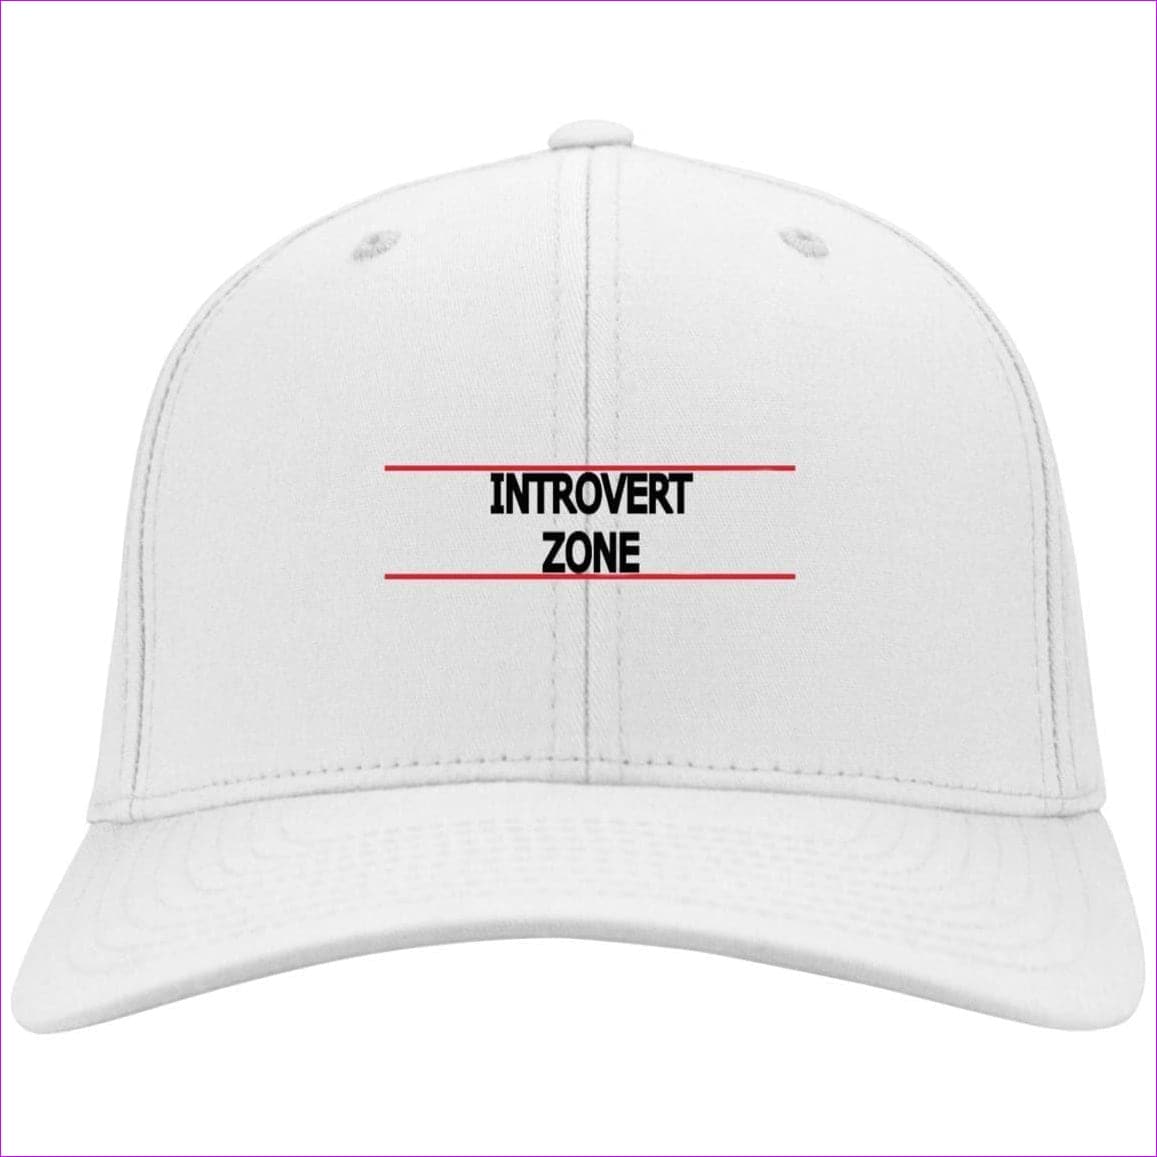 C813 Flex Fit Twill Baseball Cap White Introvert Zone Embroidered Knit Cap, Cap, Beanie - Hat at TFC&H Co.